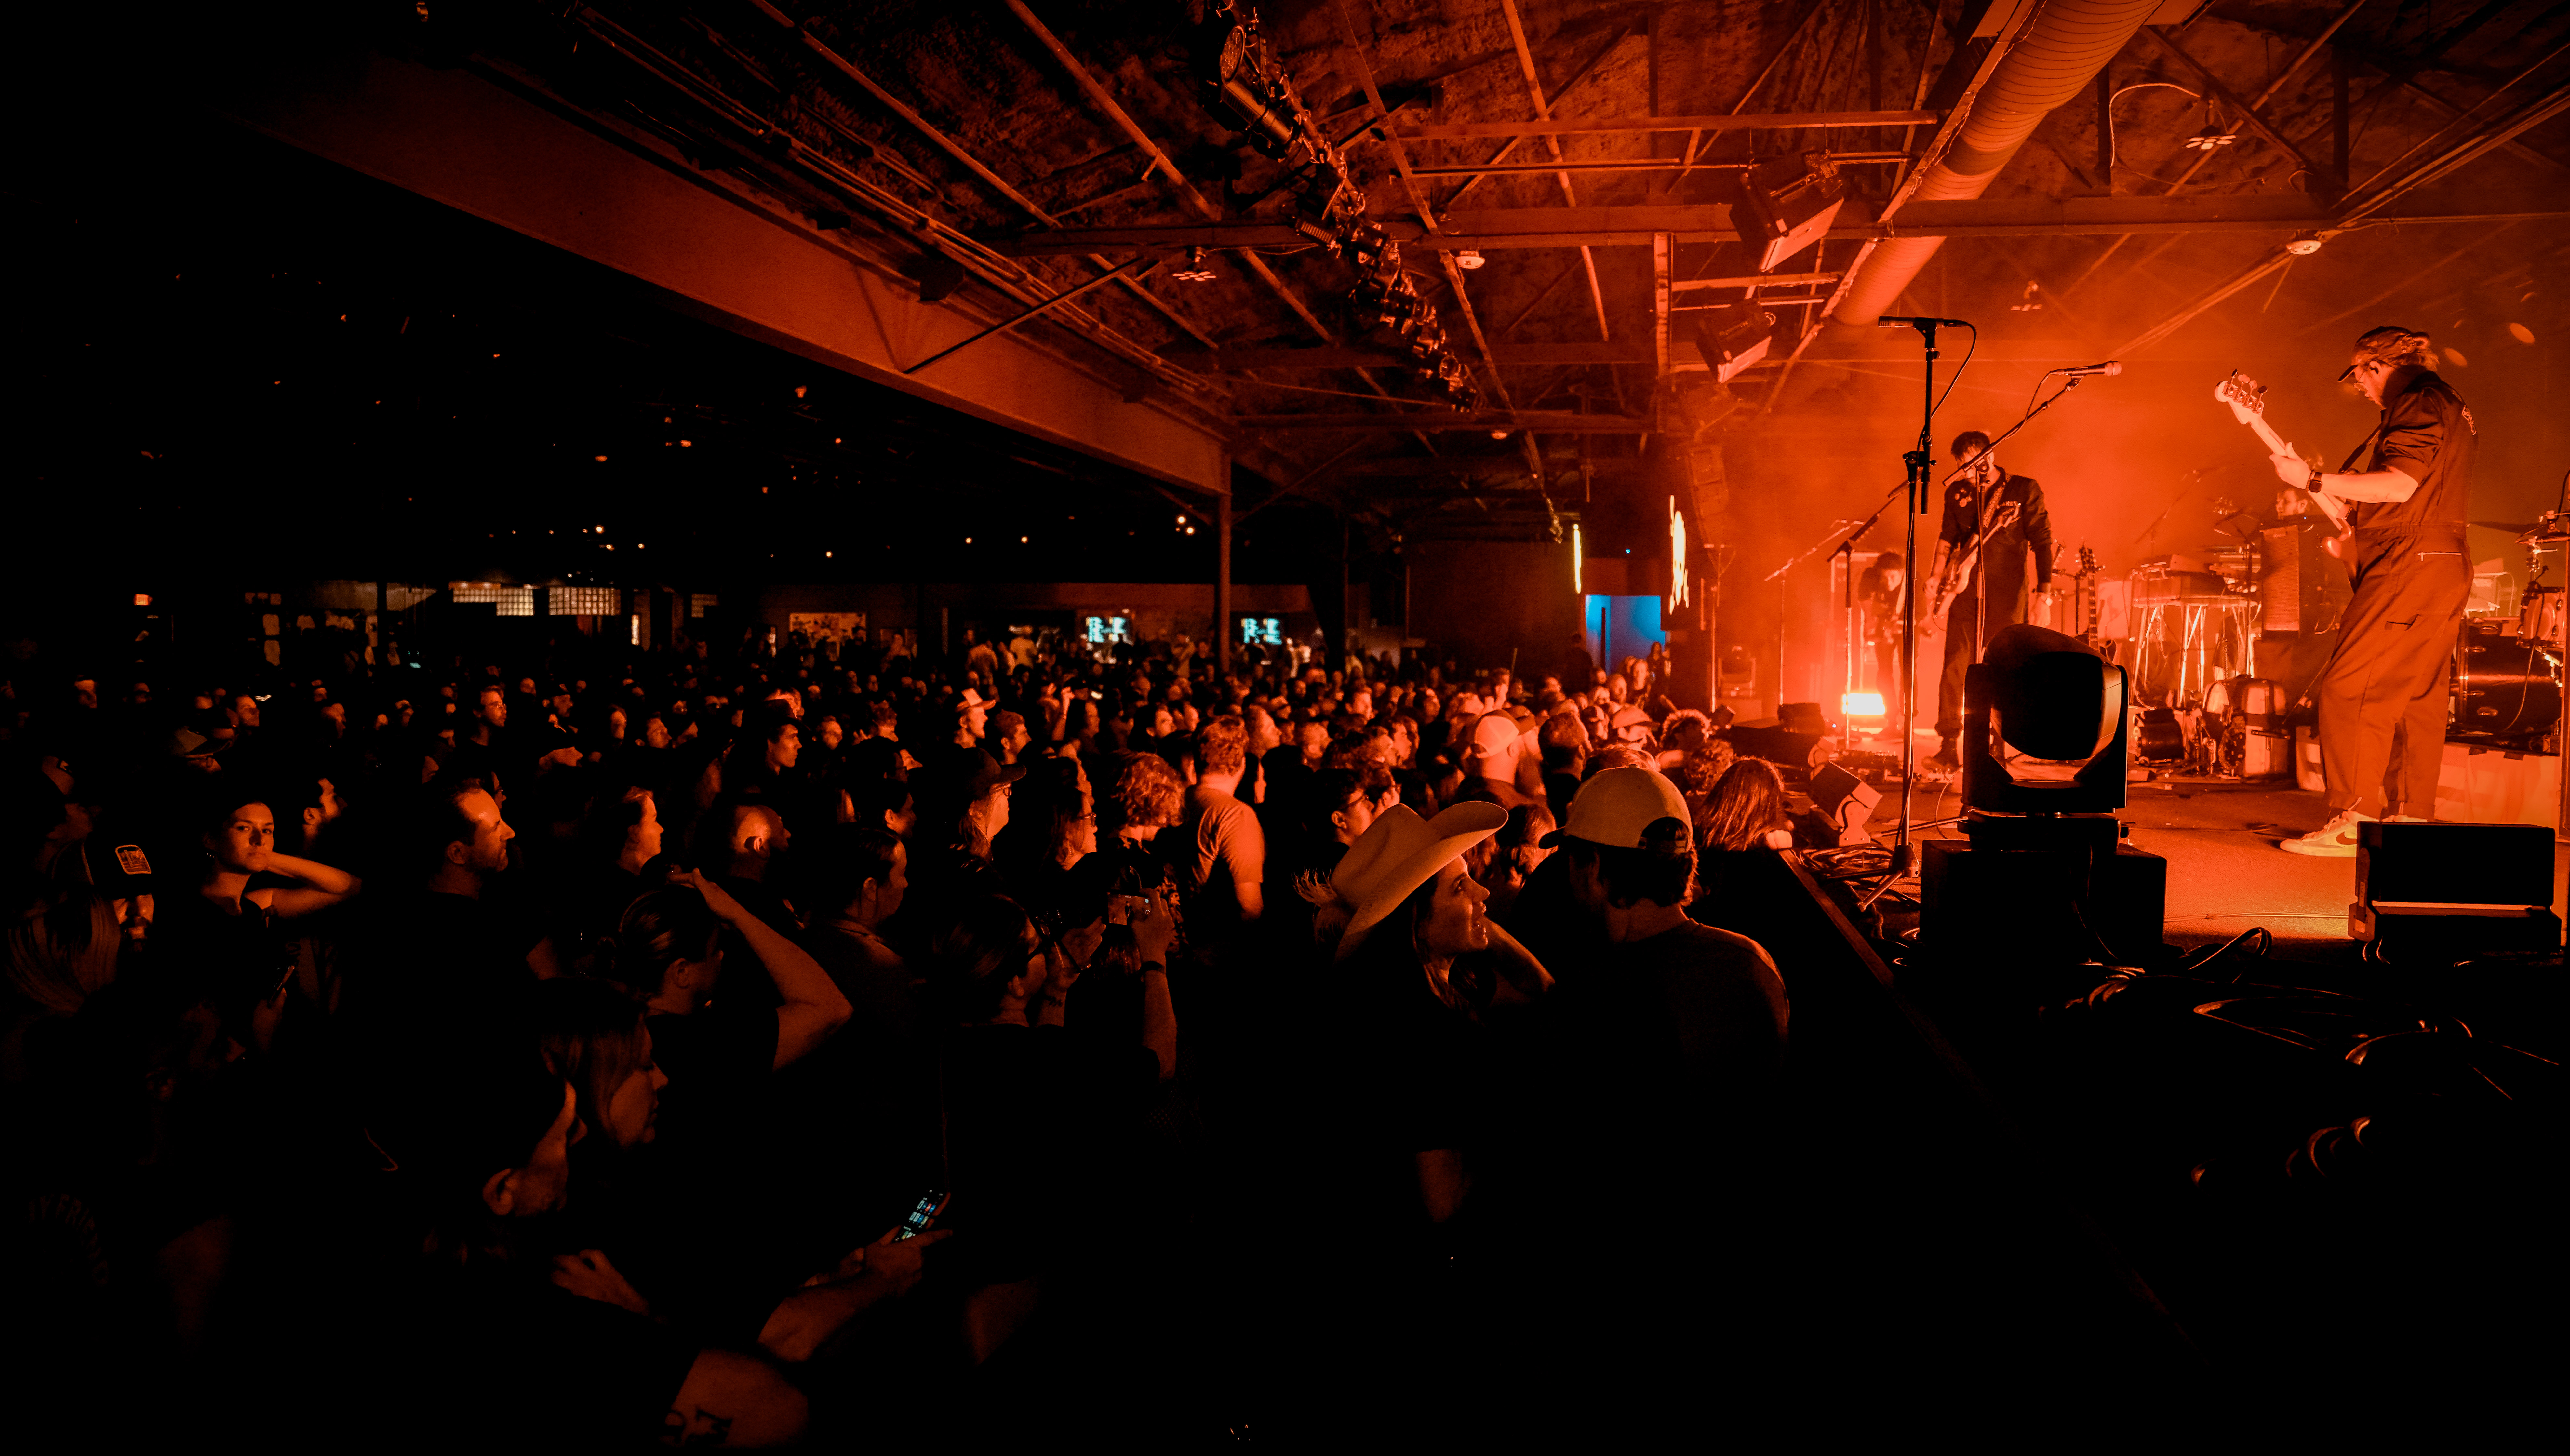 A full crowd in front of a stage